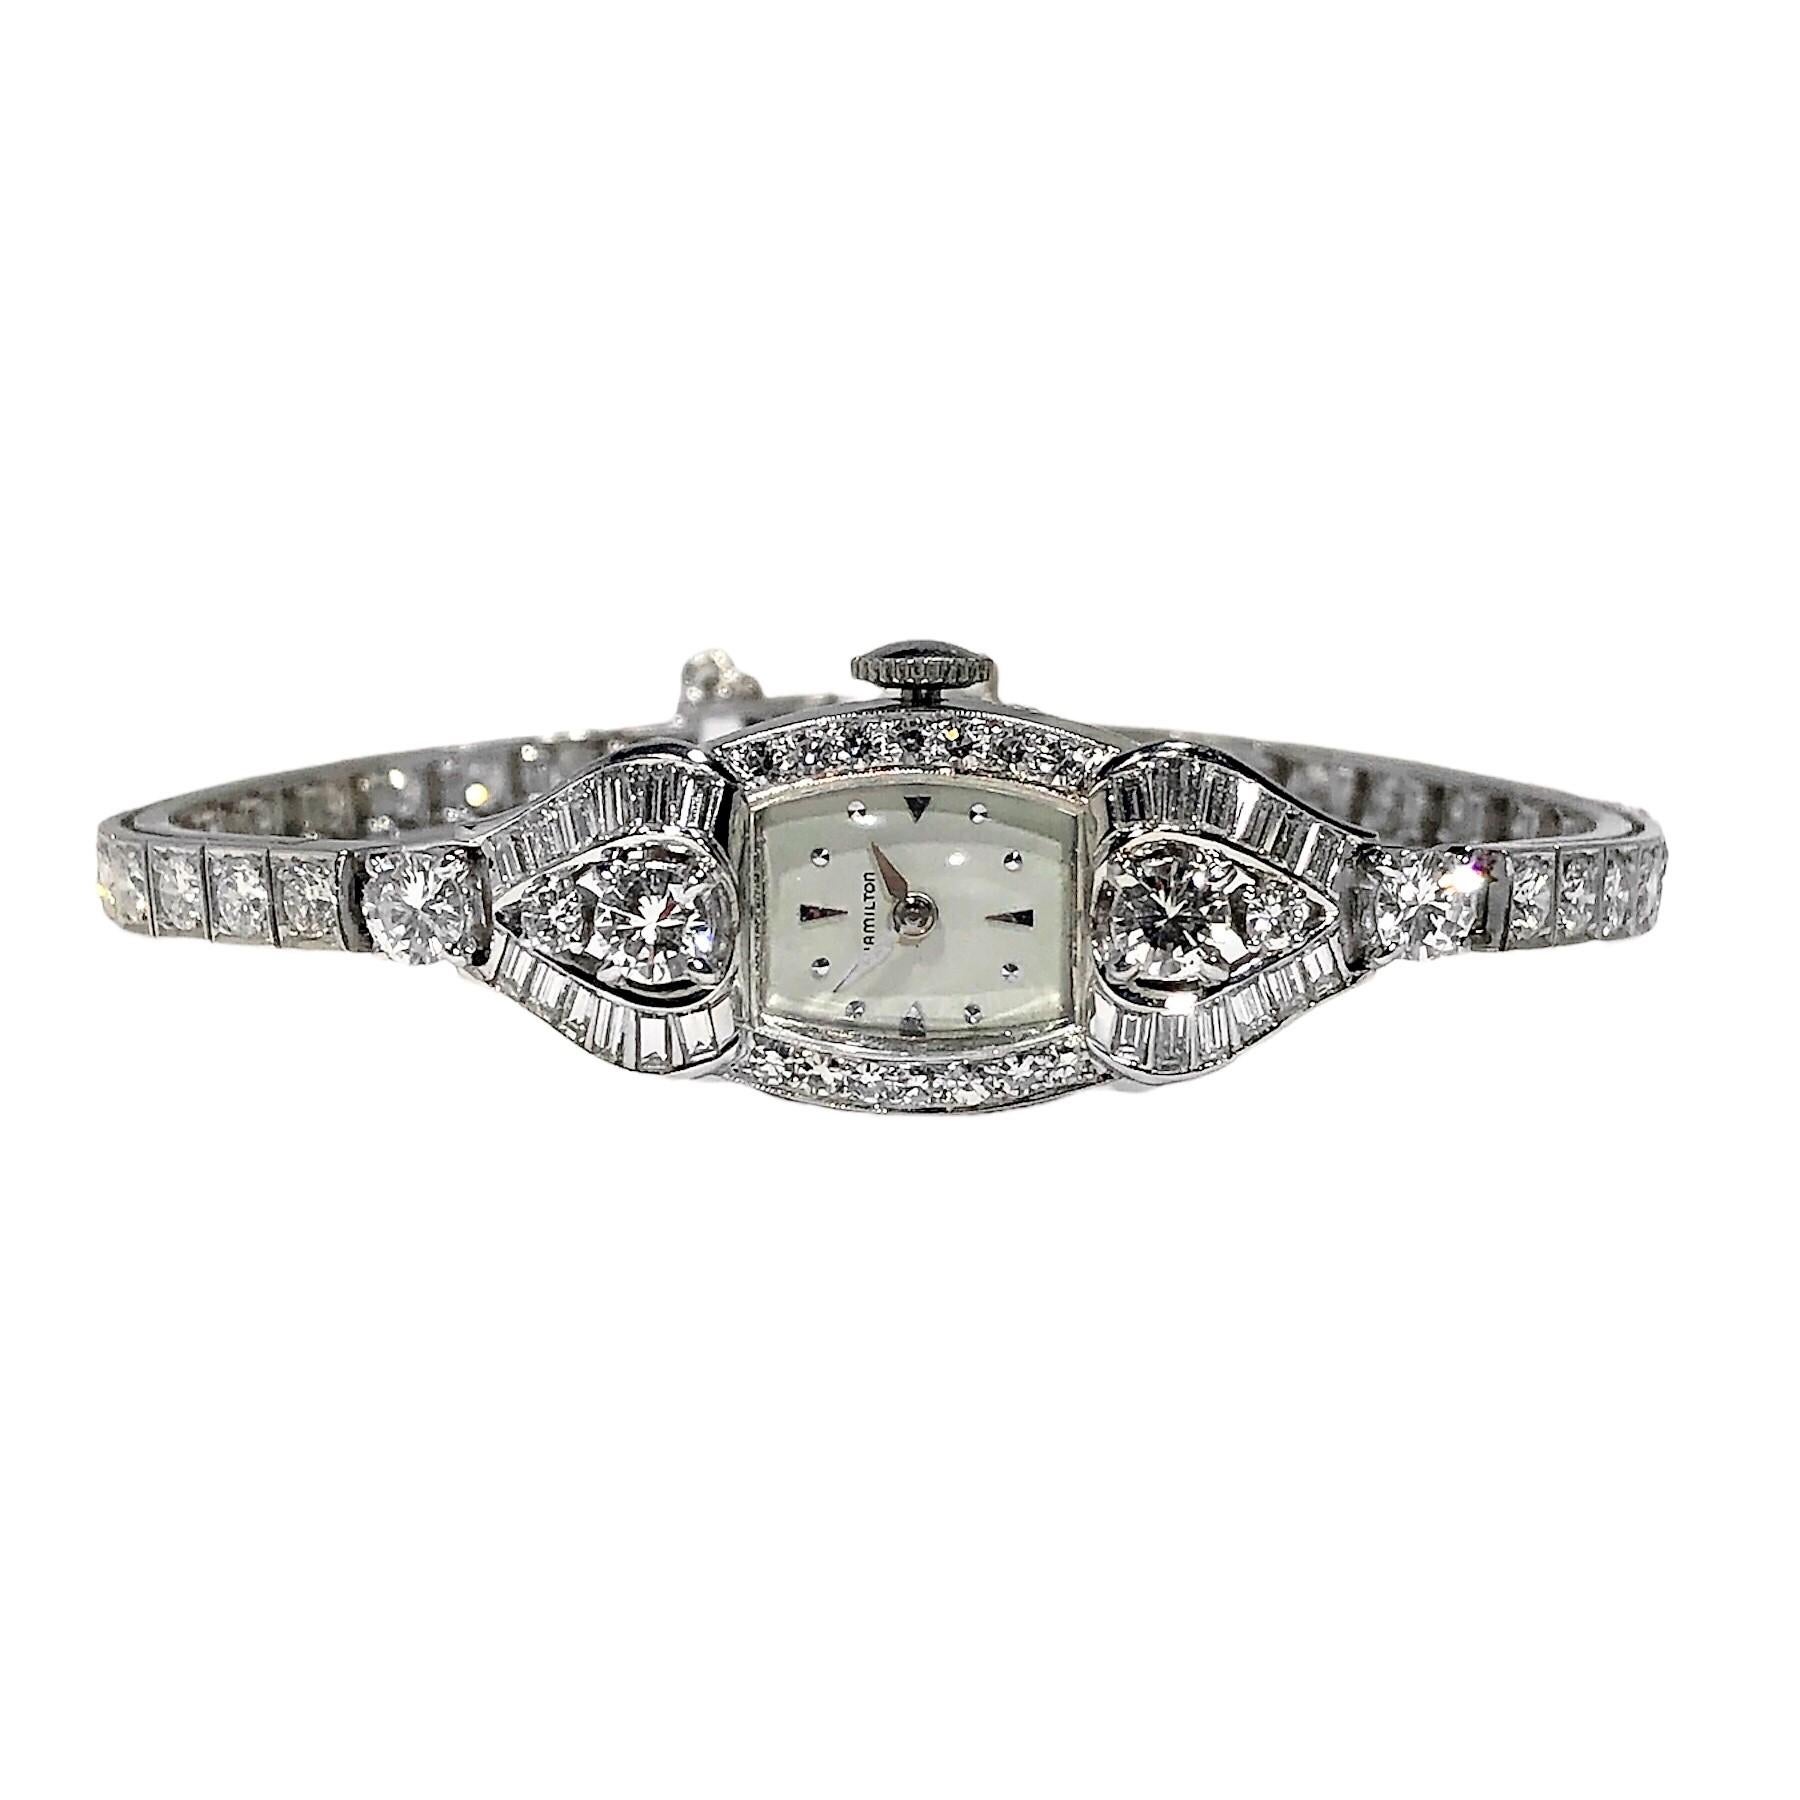 This wonderful creation by venerated American maker, Hamilton, is a pristine example of this Mid-20th Century genre, ladies cocktail watch. Crafted from platinum and replete in watch head and band with brilliant cut and baguette diamonds, it is as